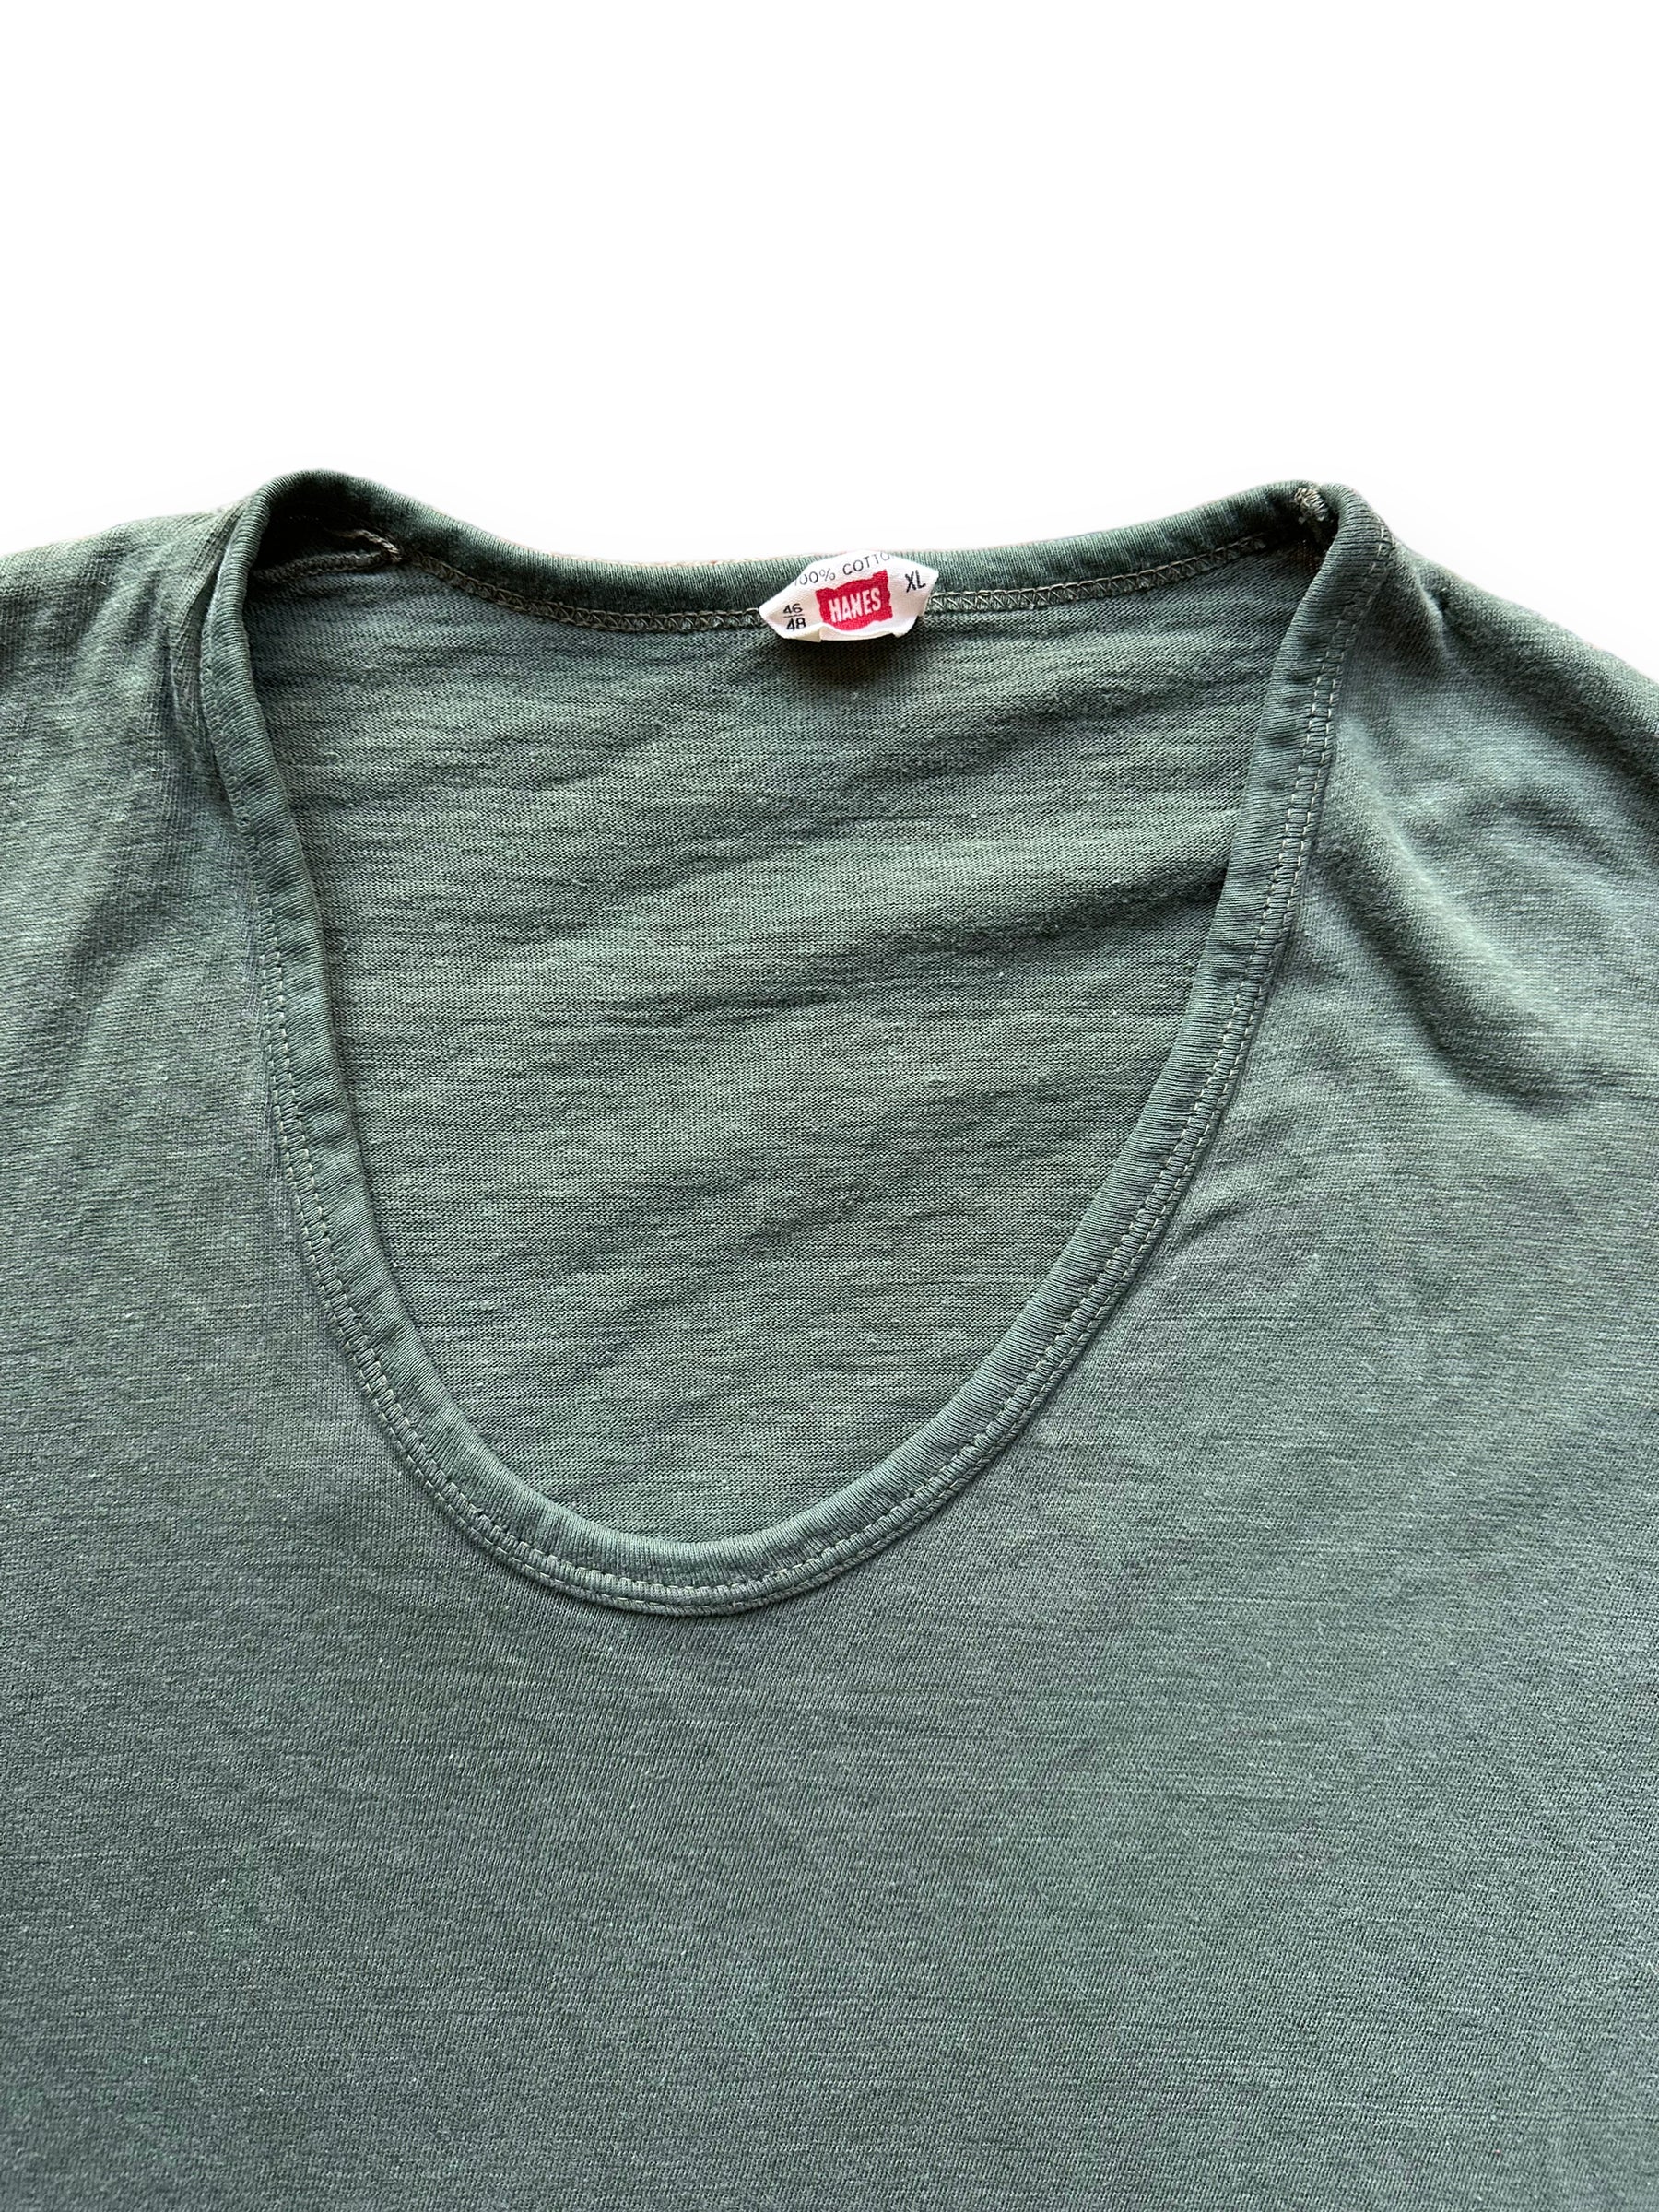 Upper Front View of Vintage Green Hanes Blank Tee SZ XL | Vintage Blank T-Shirts Seattle | Barn Owl Vintage Tees Seattle